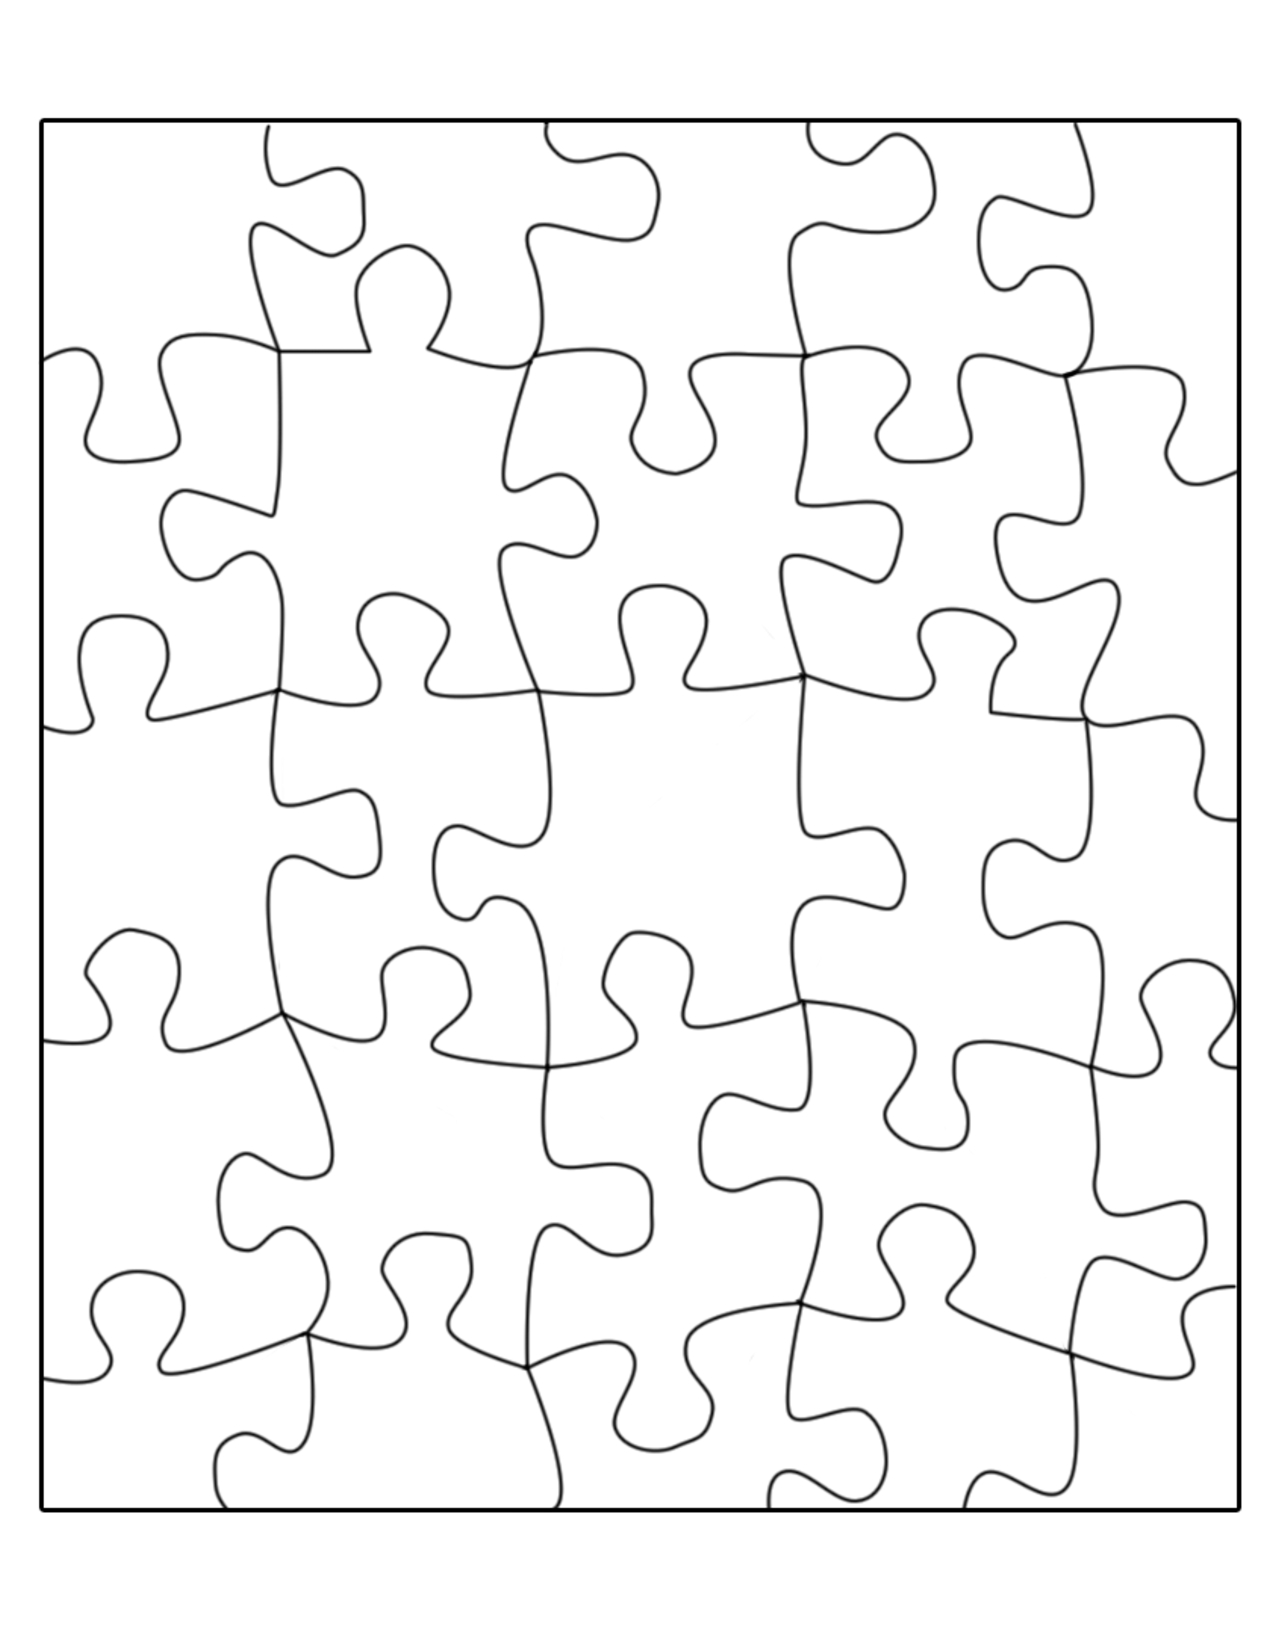 Free Puzzle Template, Download Free Clip Art, Free Clip Art On - Printable Puzzles Template